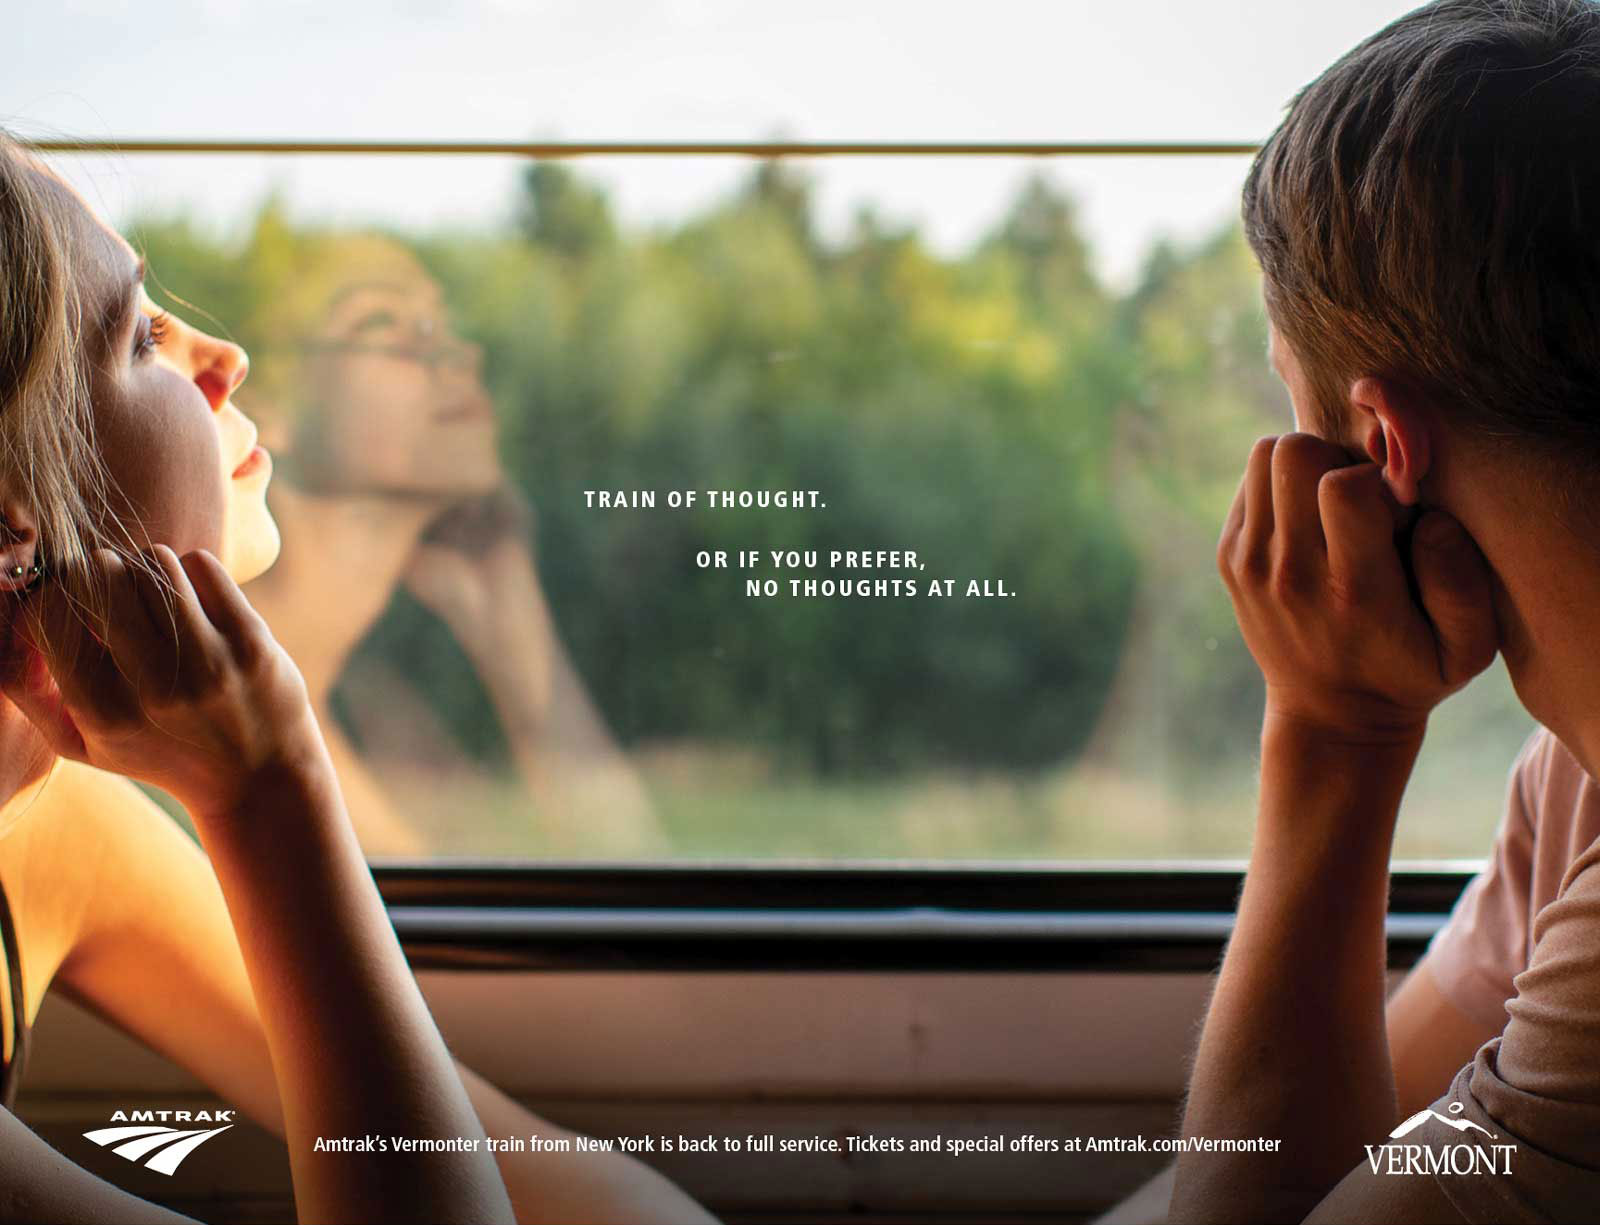 Amtrak - Train of thought.